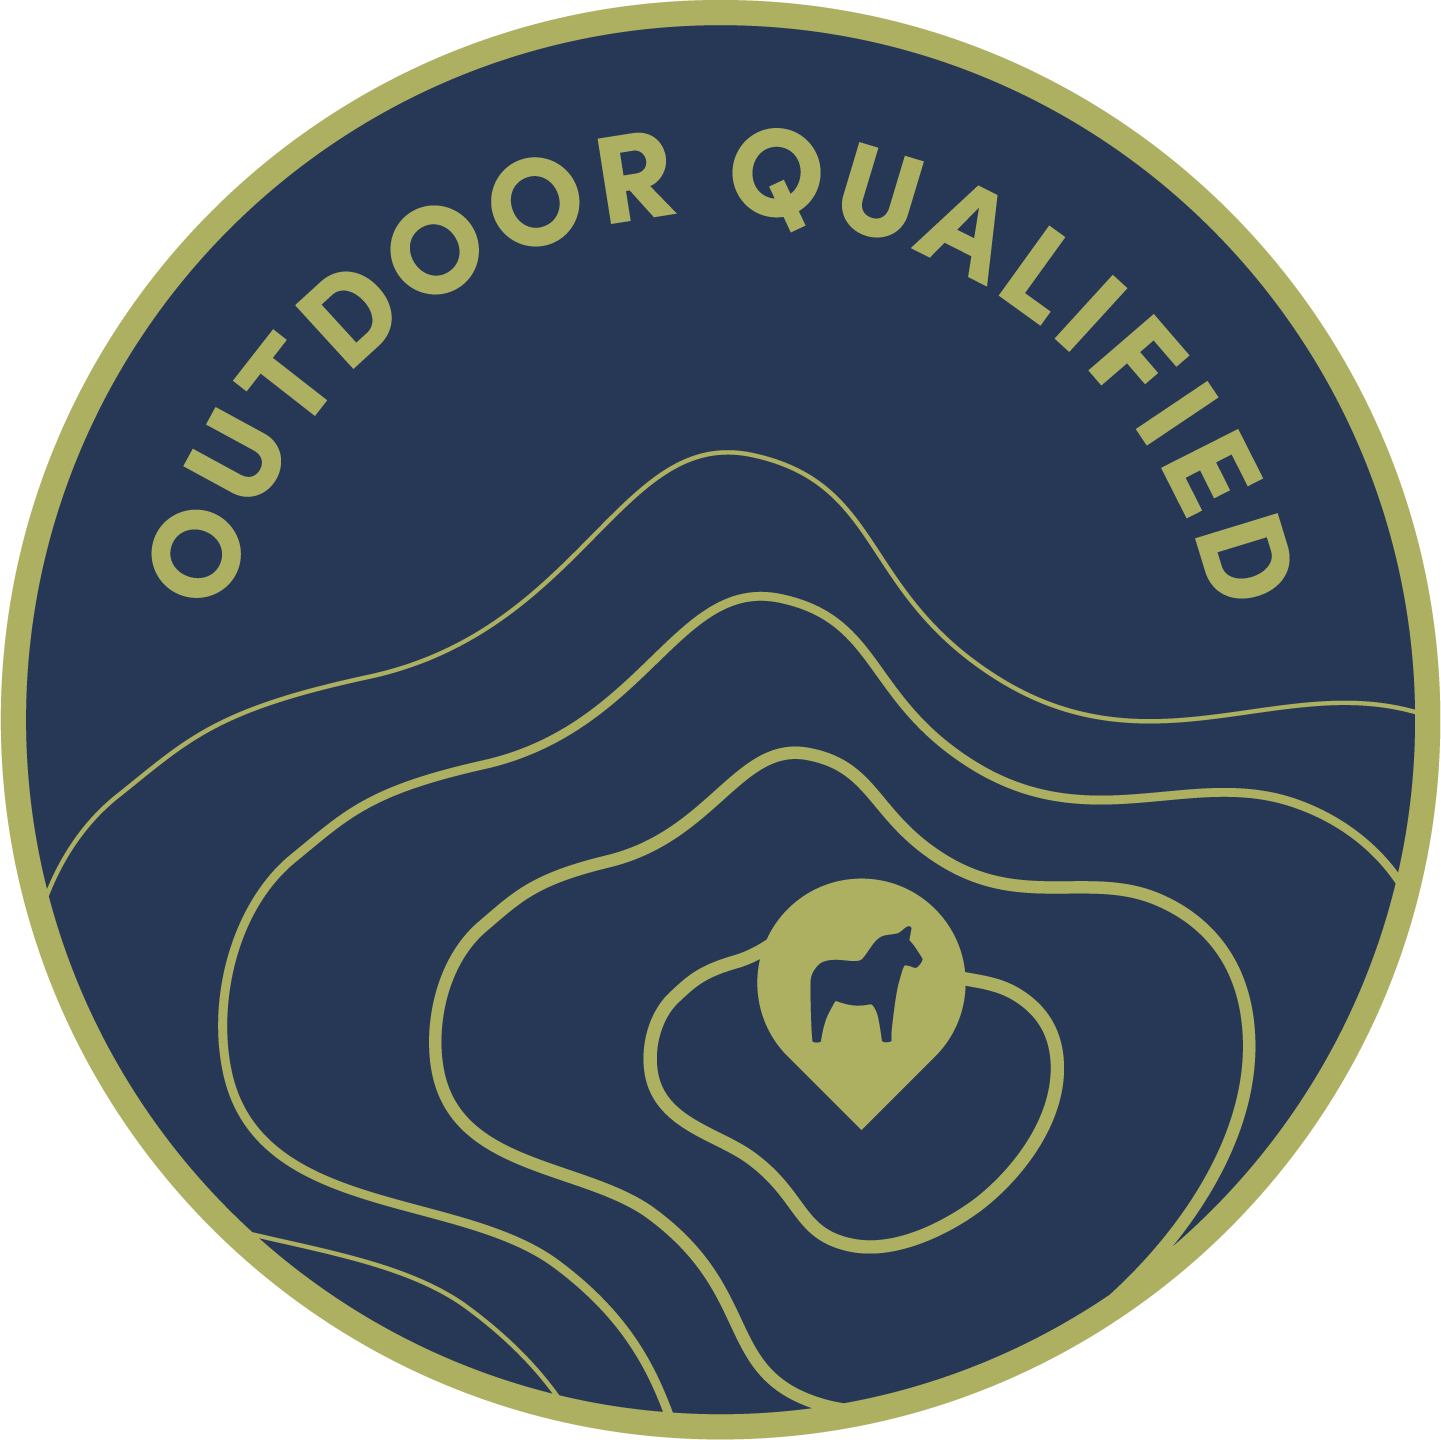 Outdoor qualified logo.